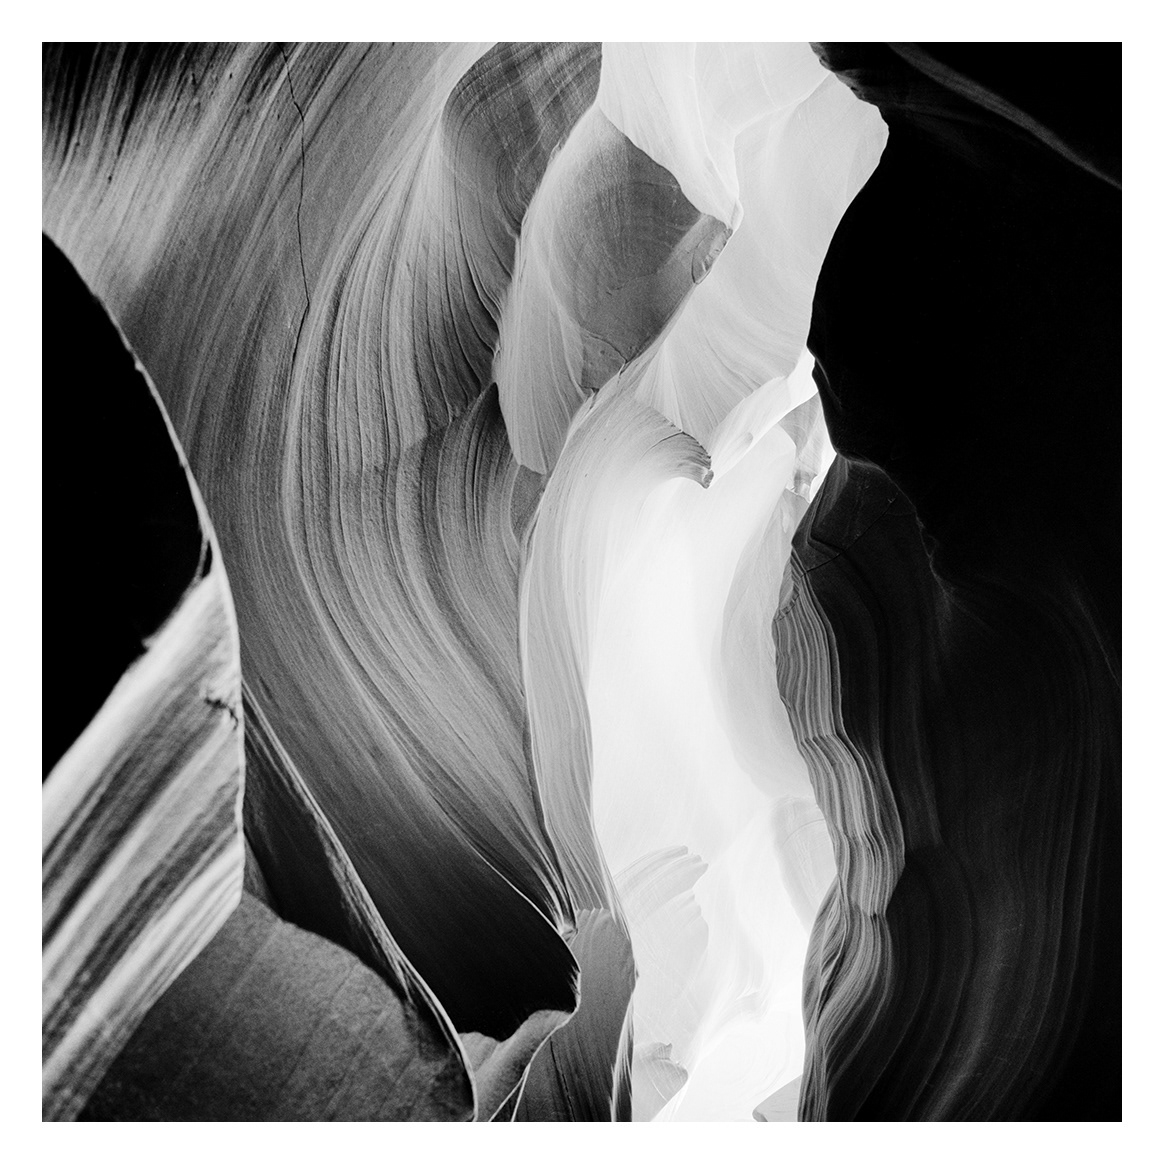 Gerald Berghammer | Black and White Photography – Antelope Canyon rock formations Arizona USA